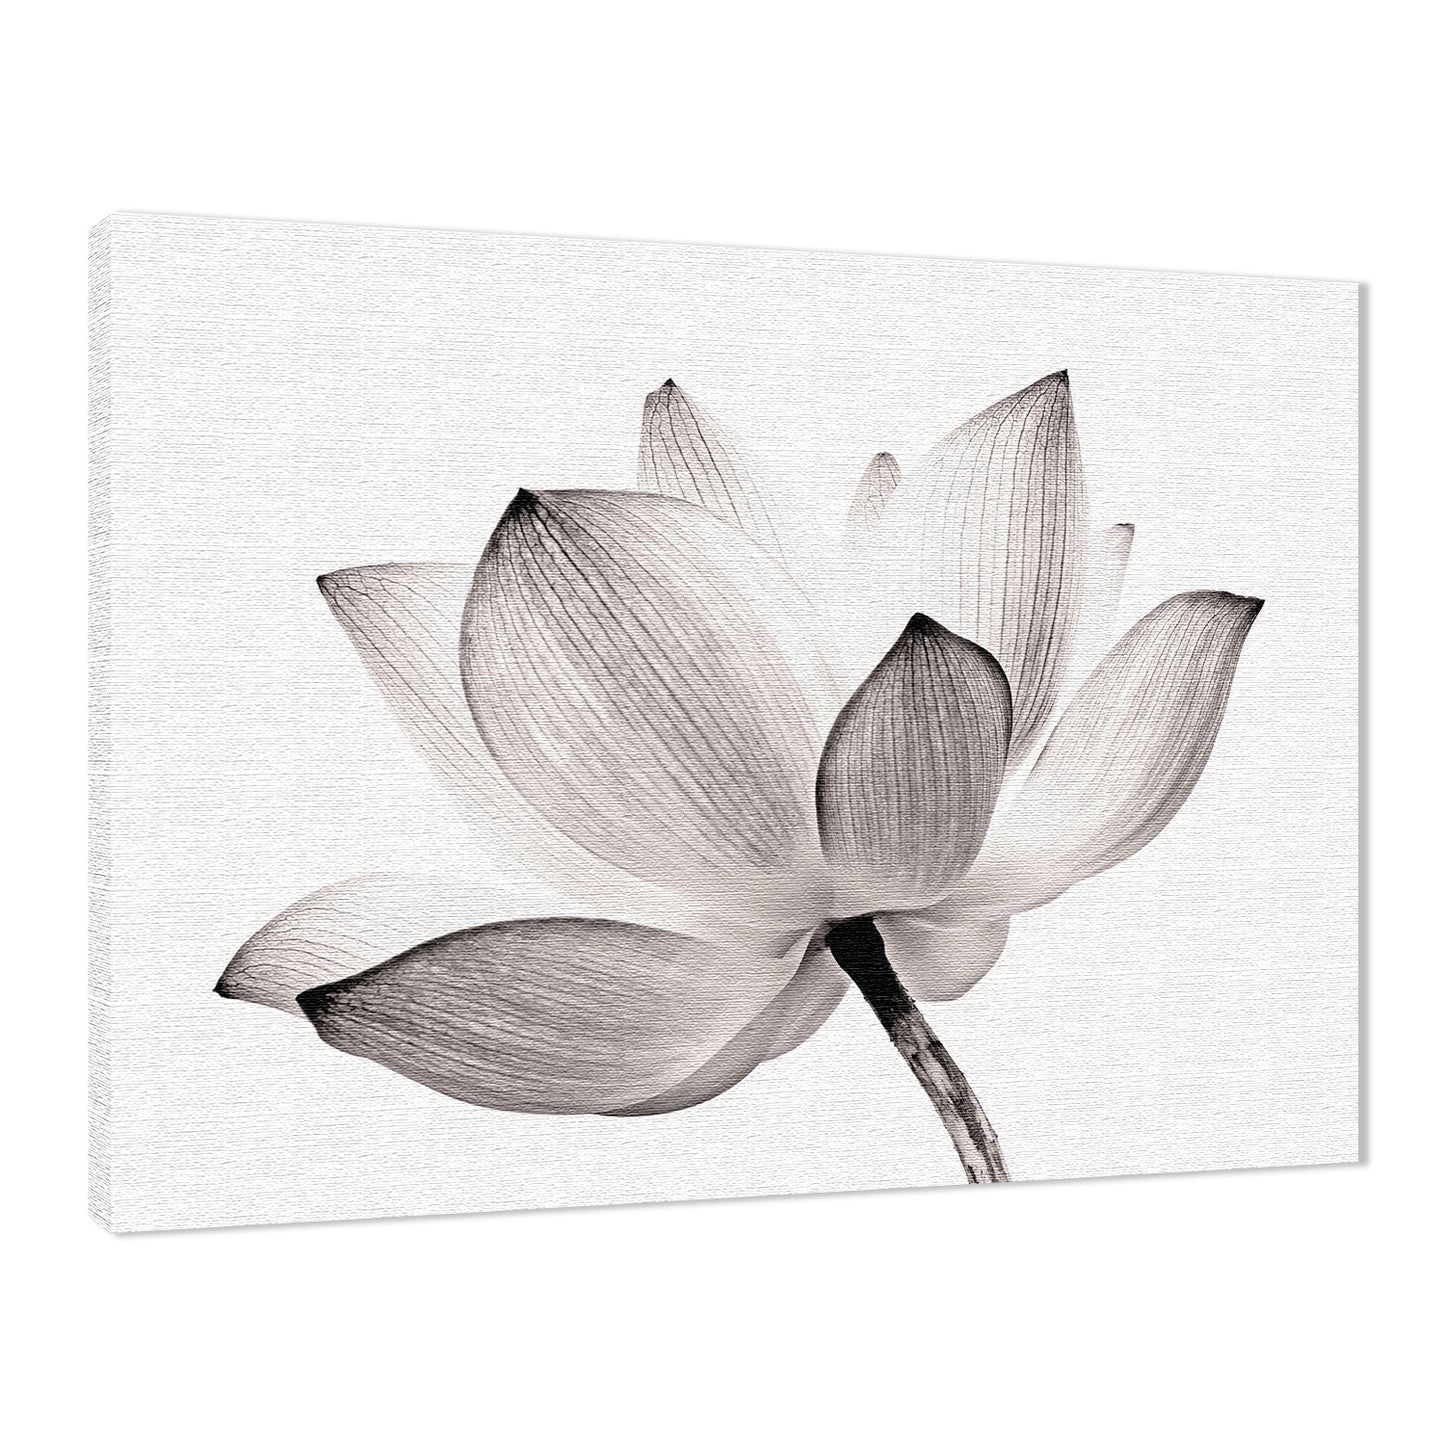 Lotus Flower Tinted Effect Floral Nature Photo Fine Art Canvas Print  - PIPAFINEART